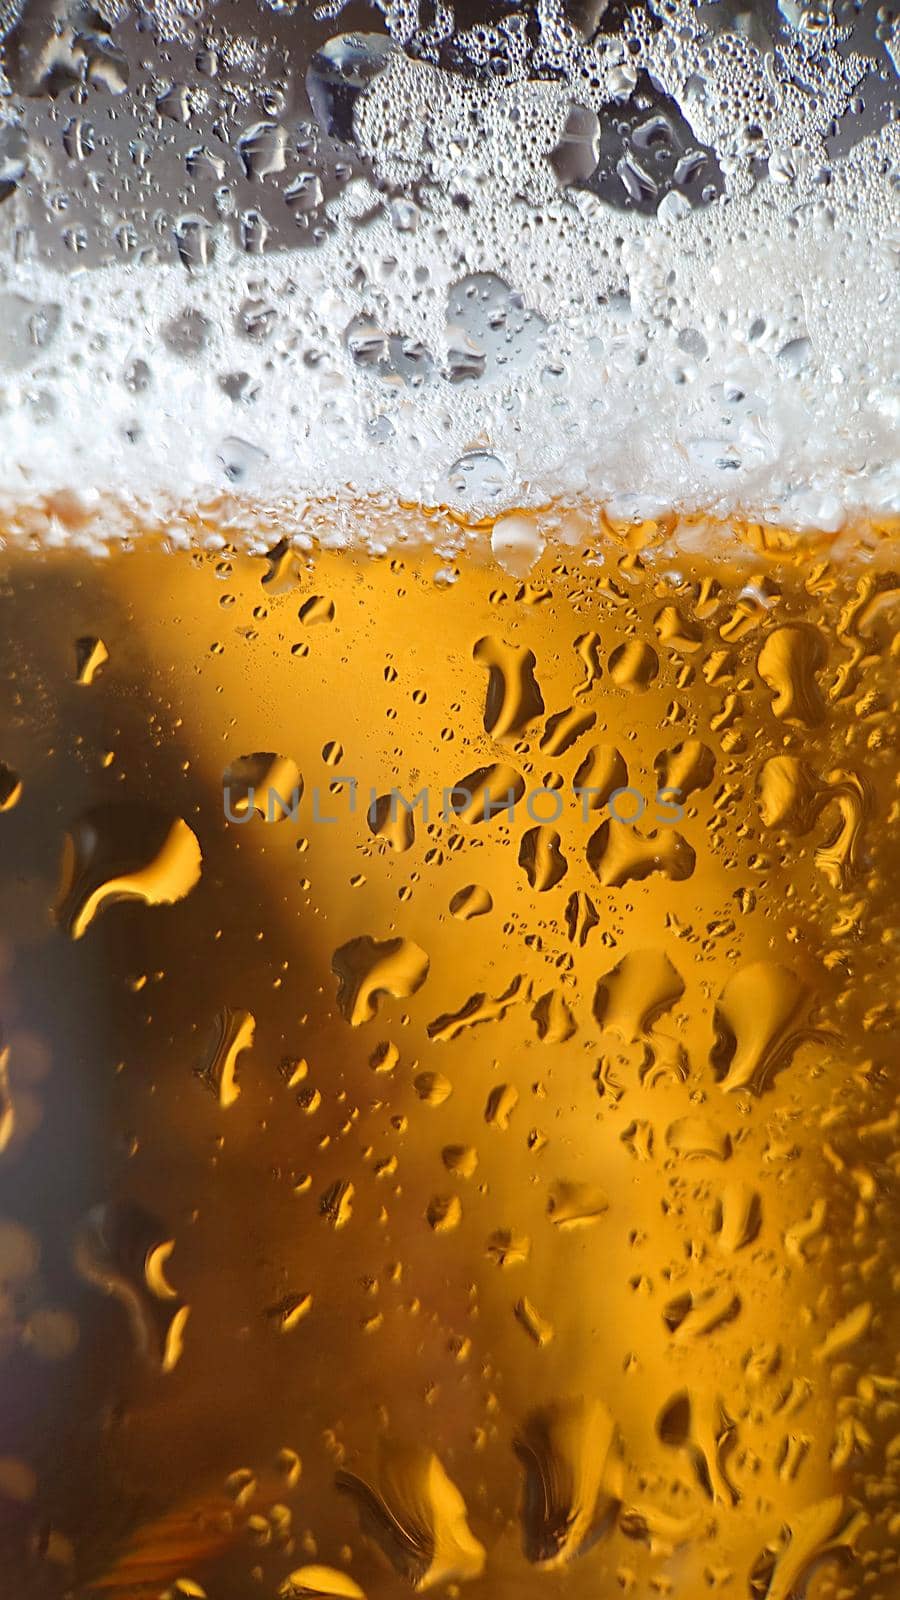 Golden beer with bubbles and foam in a glass.Texture or background. Macro